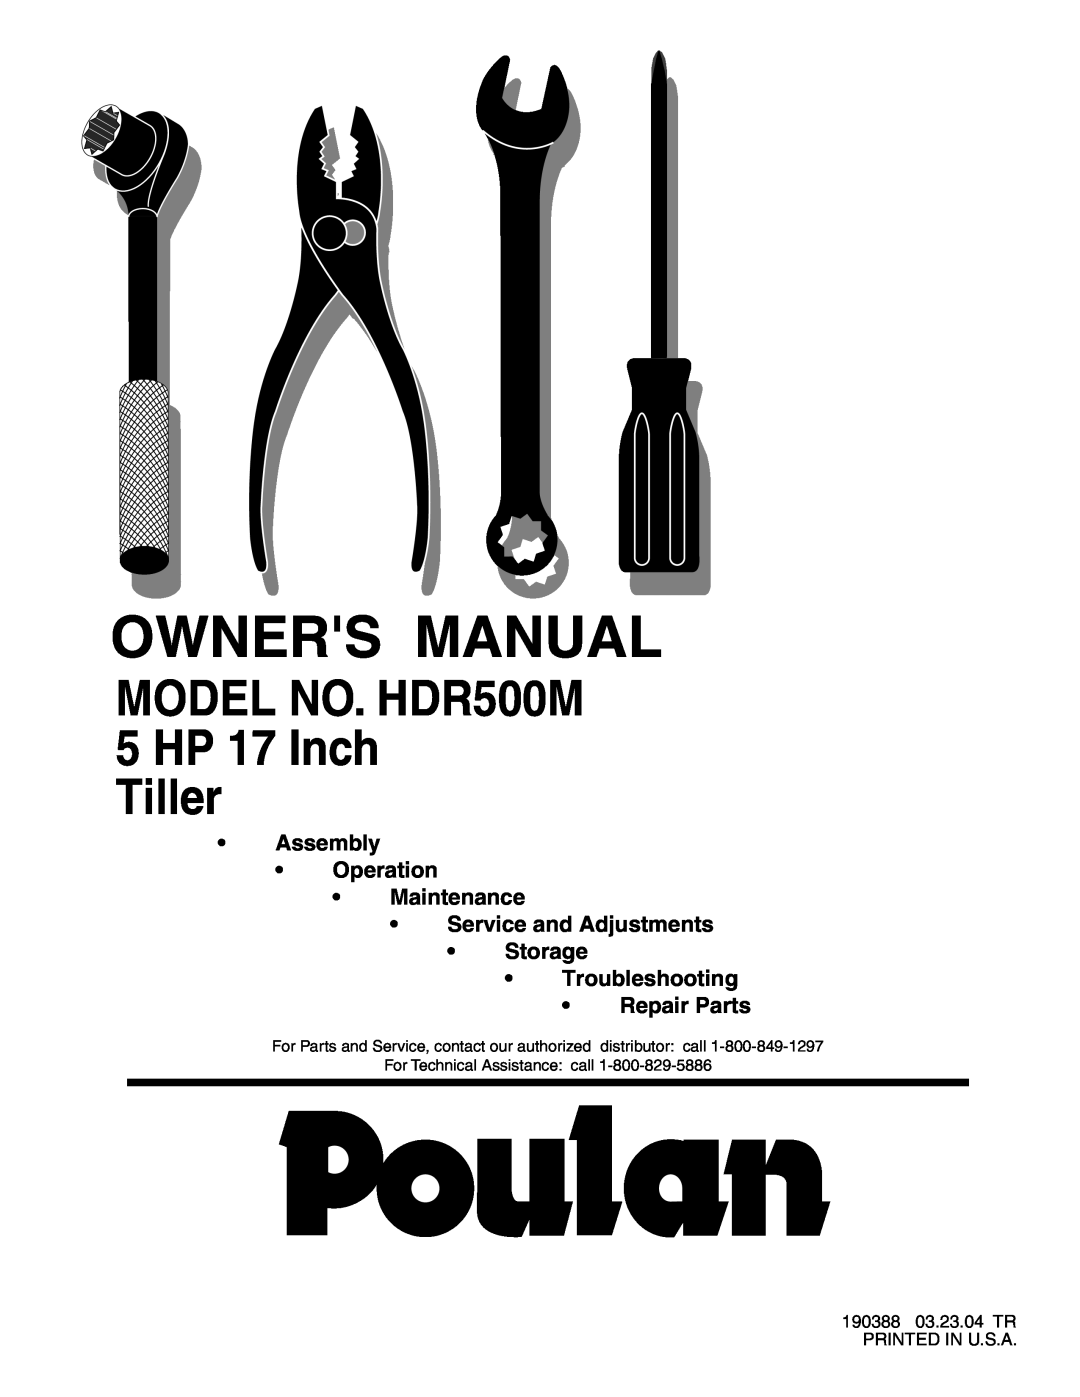 Poulan 190388 owner manual MODEL NO. HDR500M 5 HP 17 Inch Tiller, Troubleshooting Repair Parts 